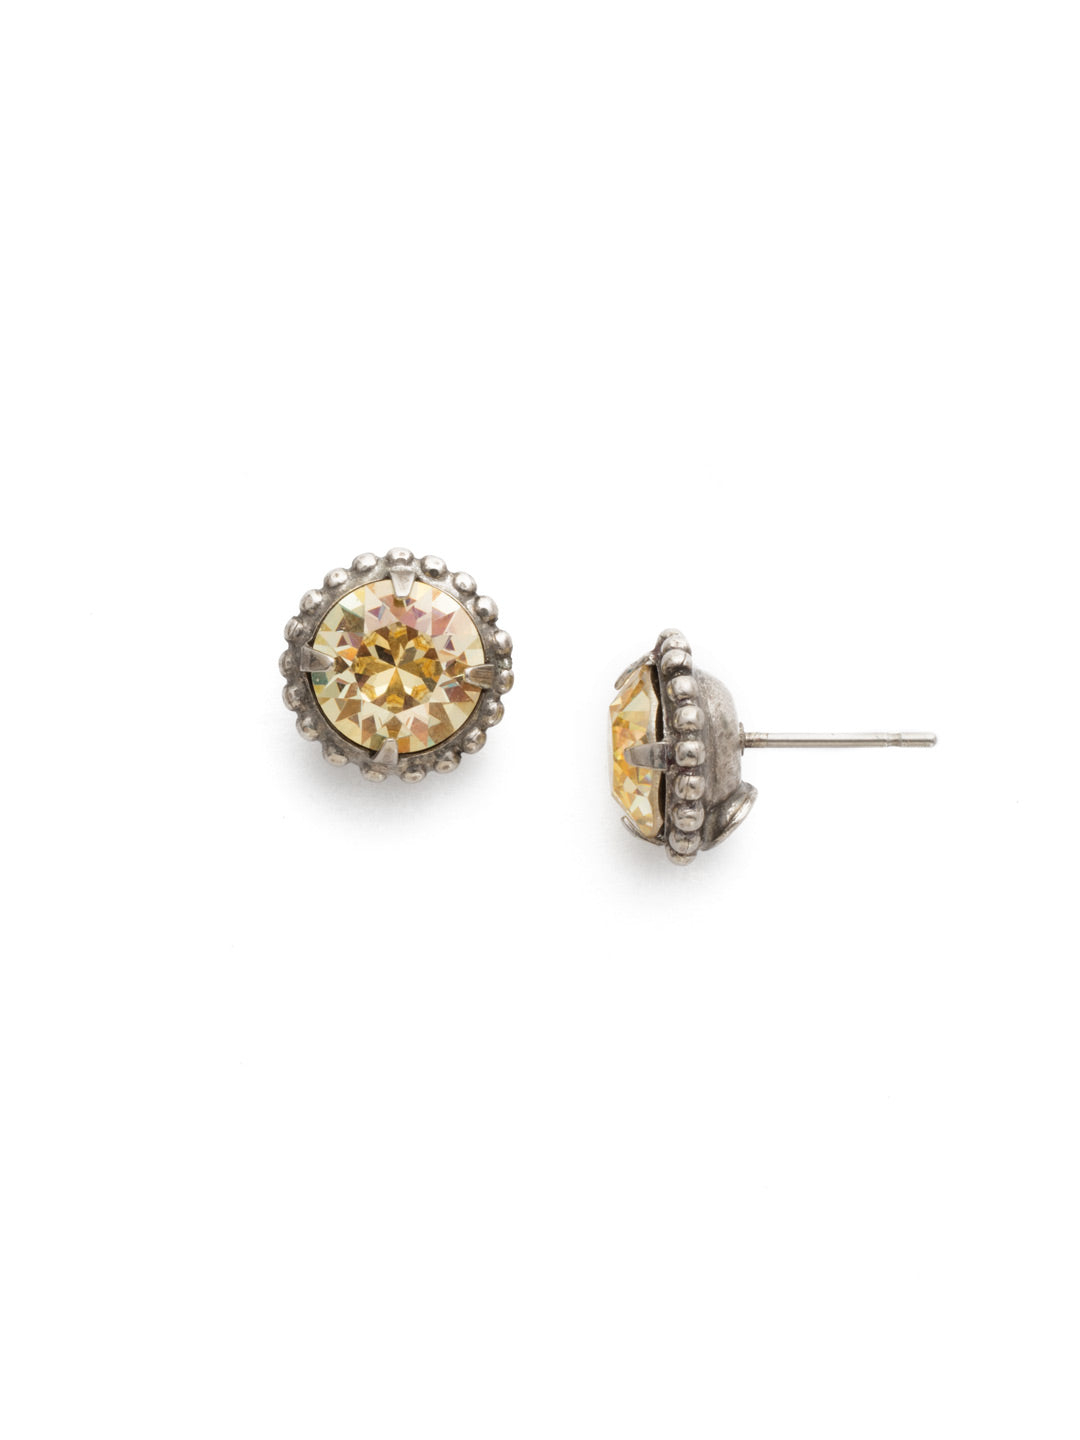 Simplicity Stud Earring - EBY38ASCCH